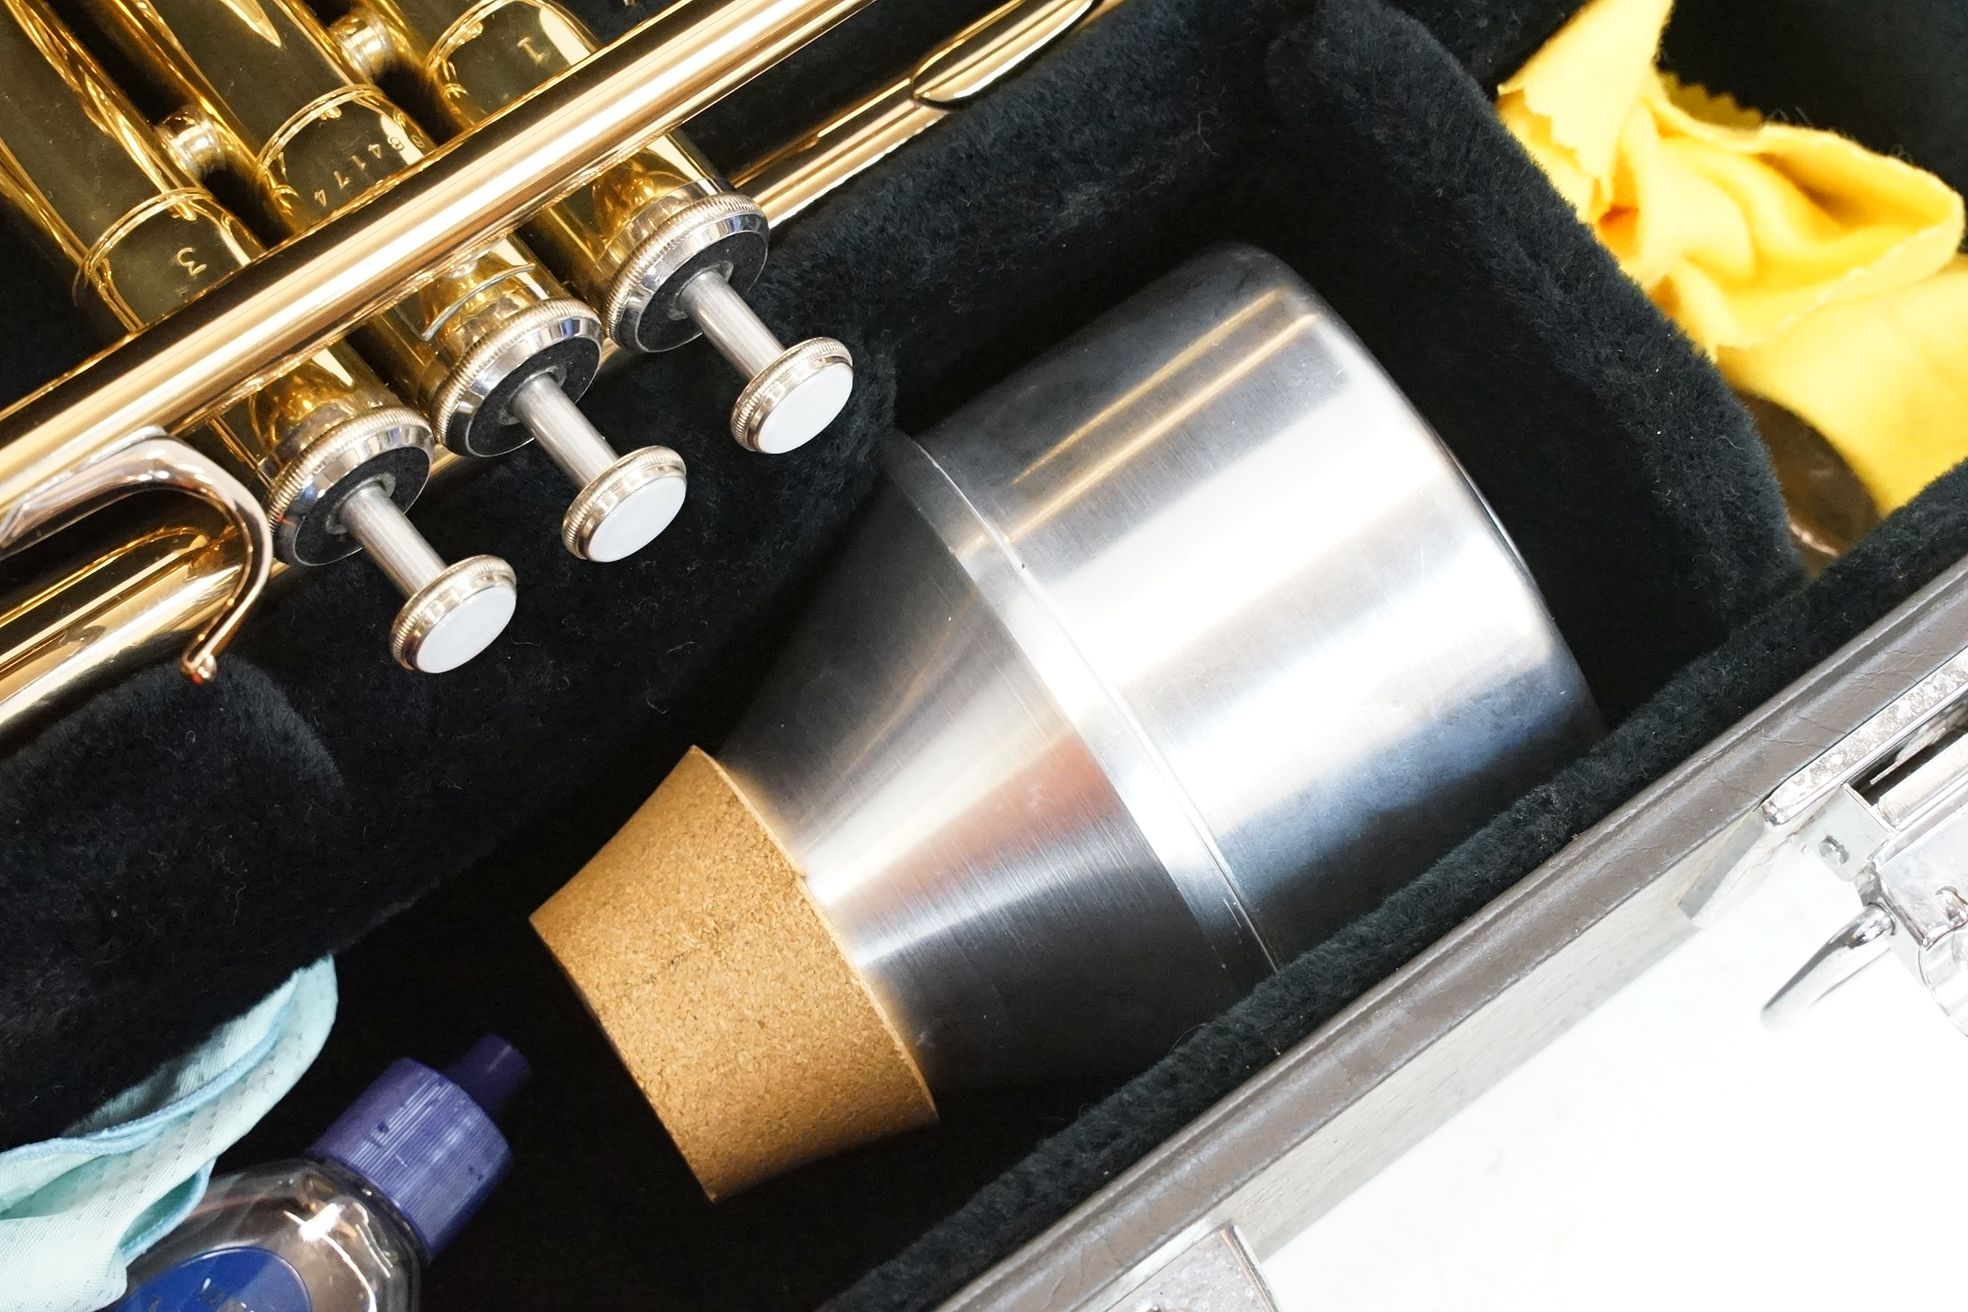 Yamaha YTR 43356 brass trumpet, serial no. 684174, with mouthpiece, in fitted case. - Image 8 of 9